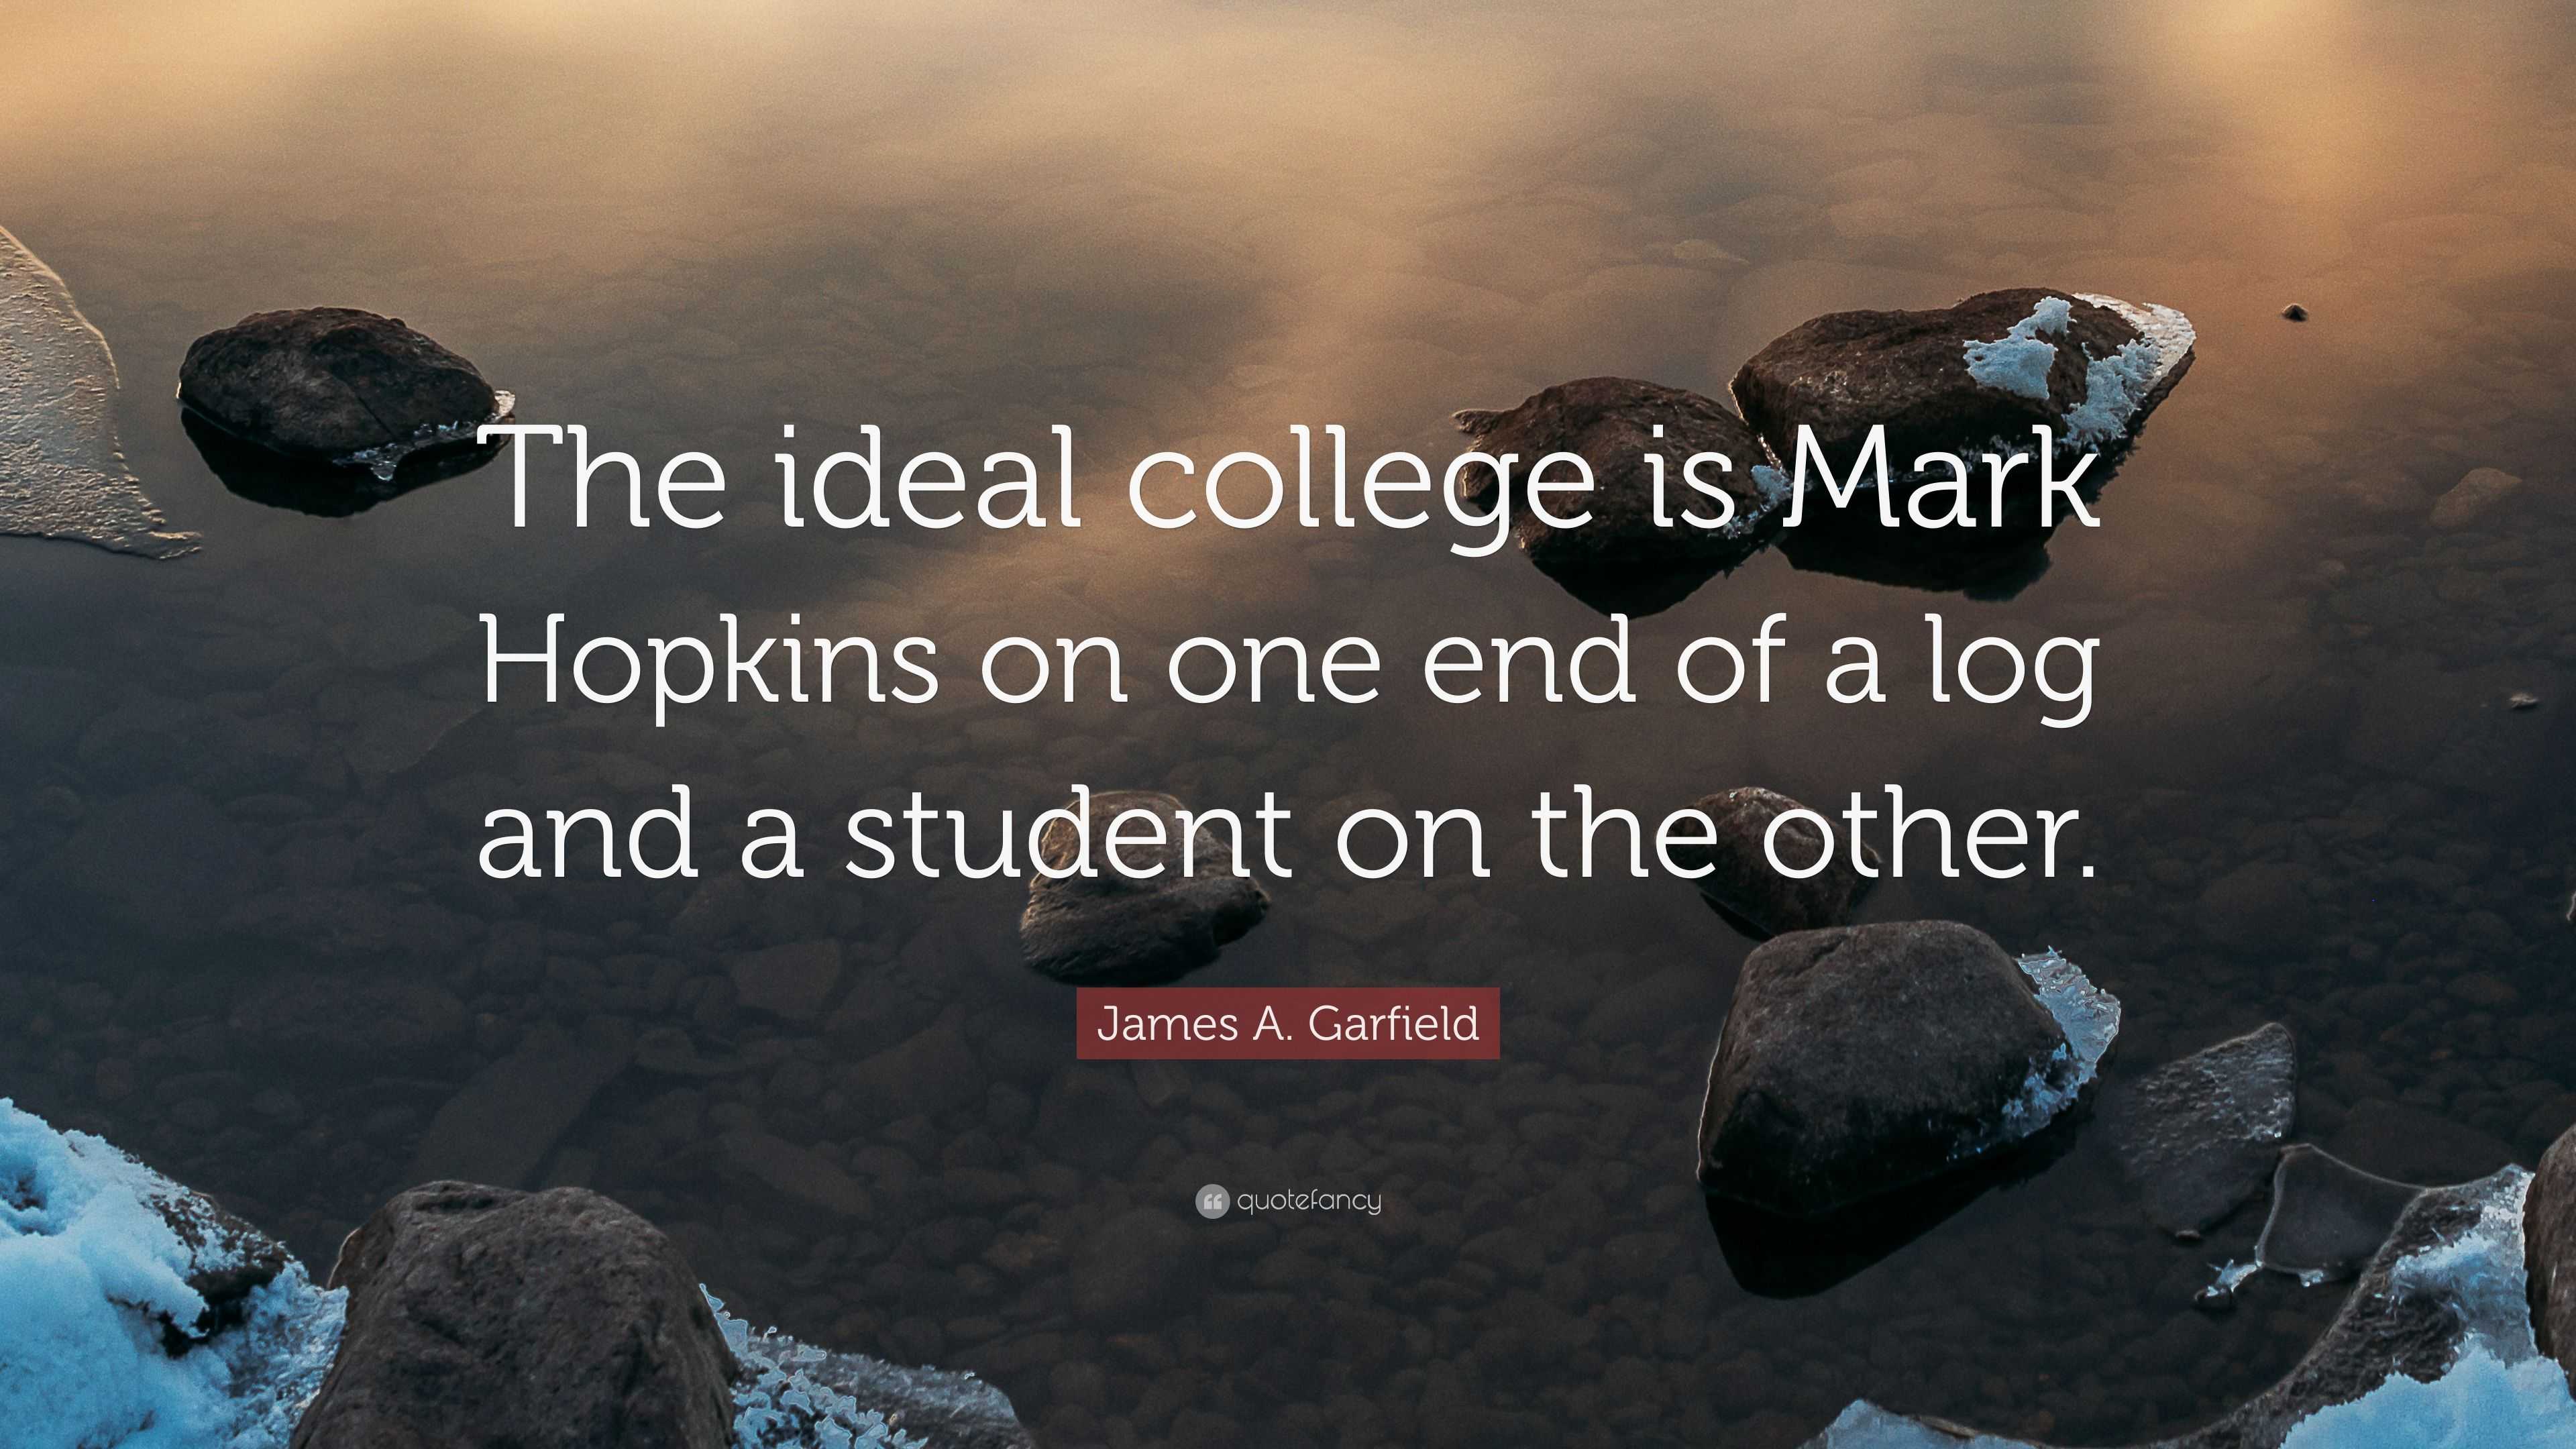 James A. Garfield Quote: “The ideal college is Mark Hopkins on one end of a  log